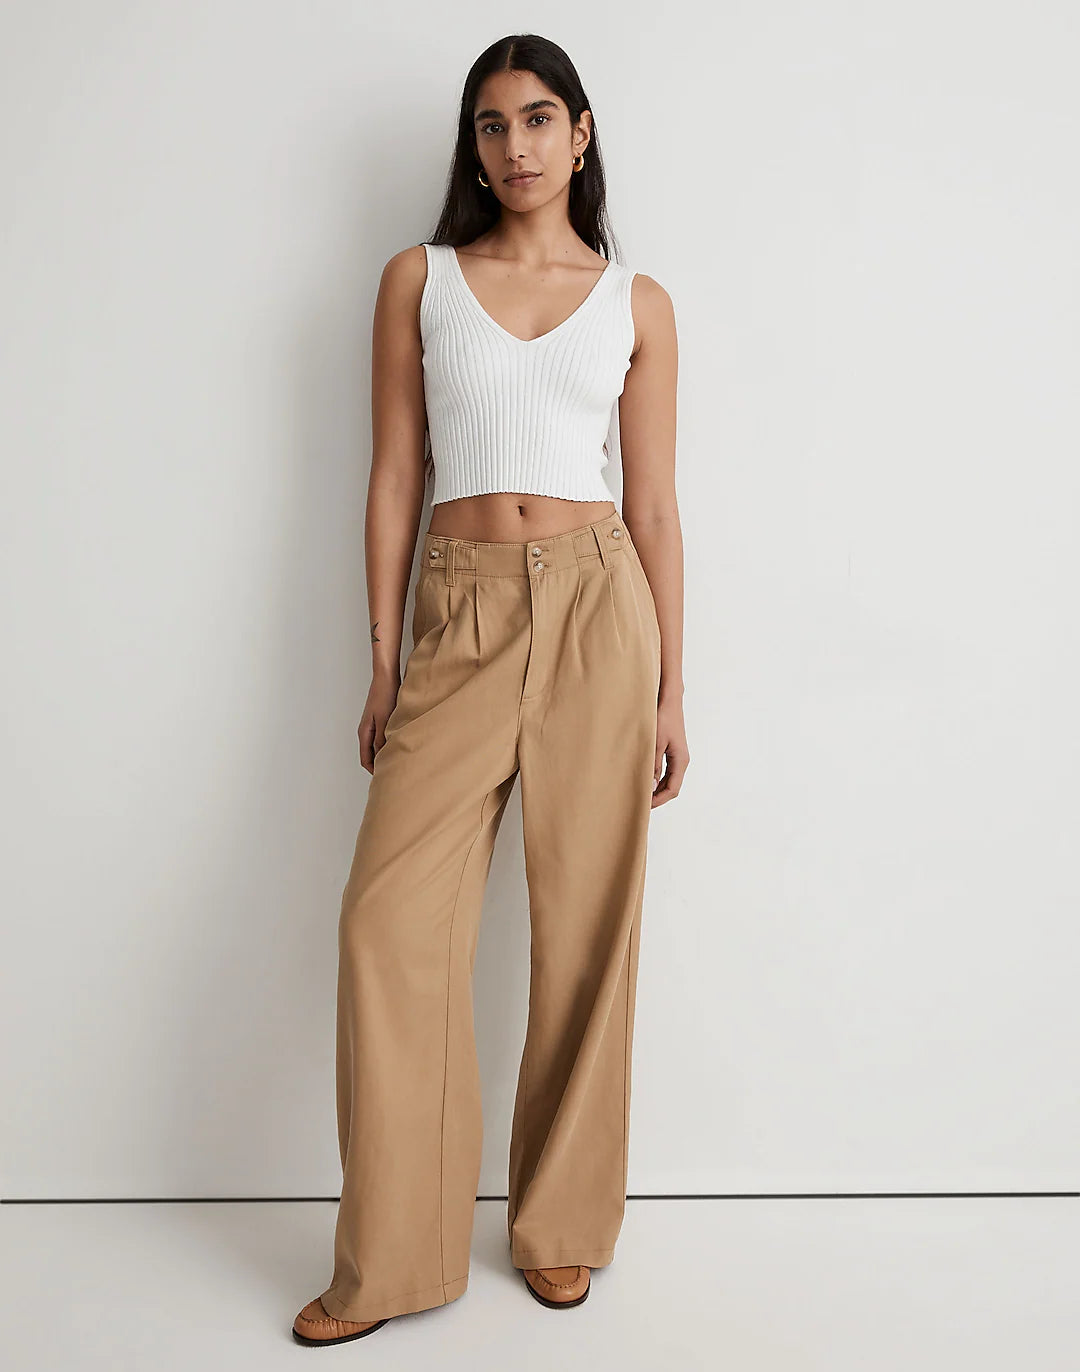 18 Petite Linen Pants You Won't Have to Tailor - Starting at $25